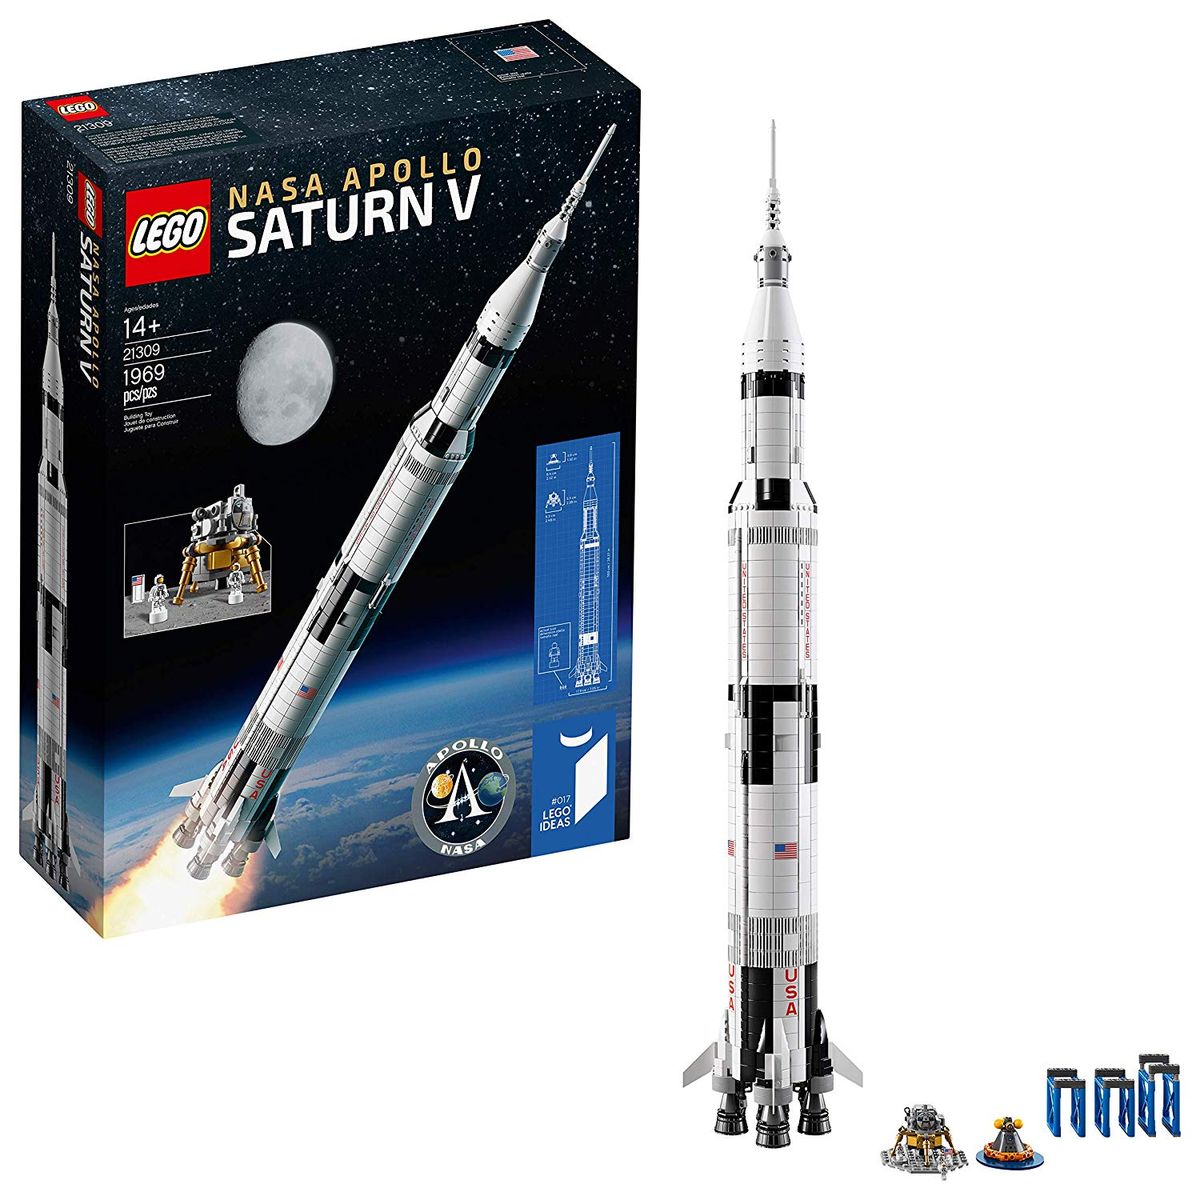 Cyber Monday Lego Deals: The Best Lego Ideas for Space Fans